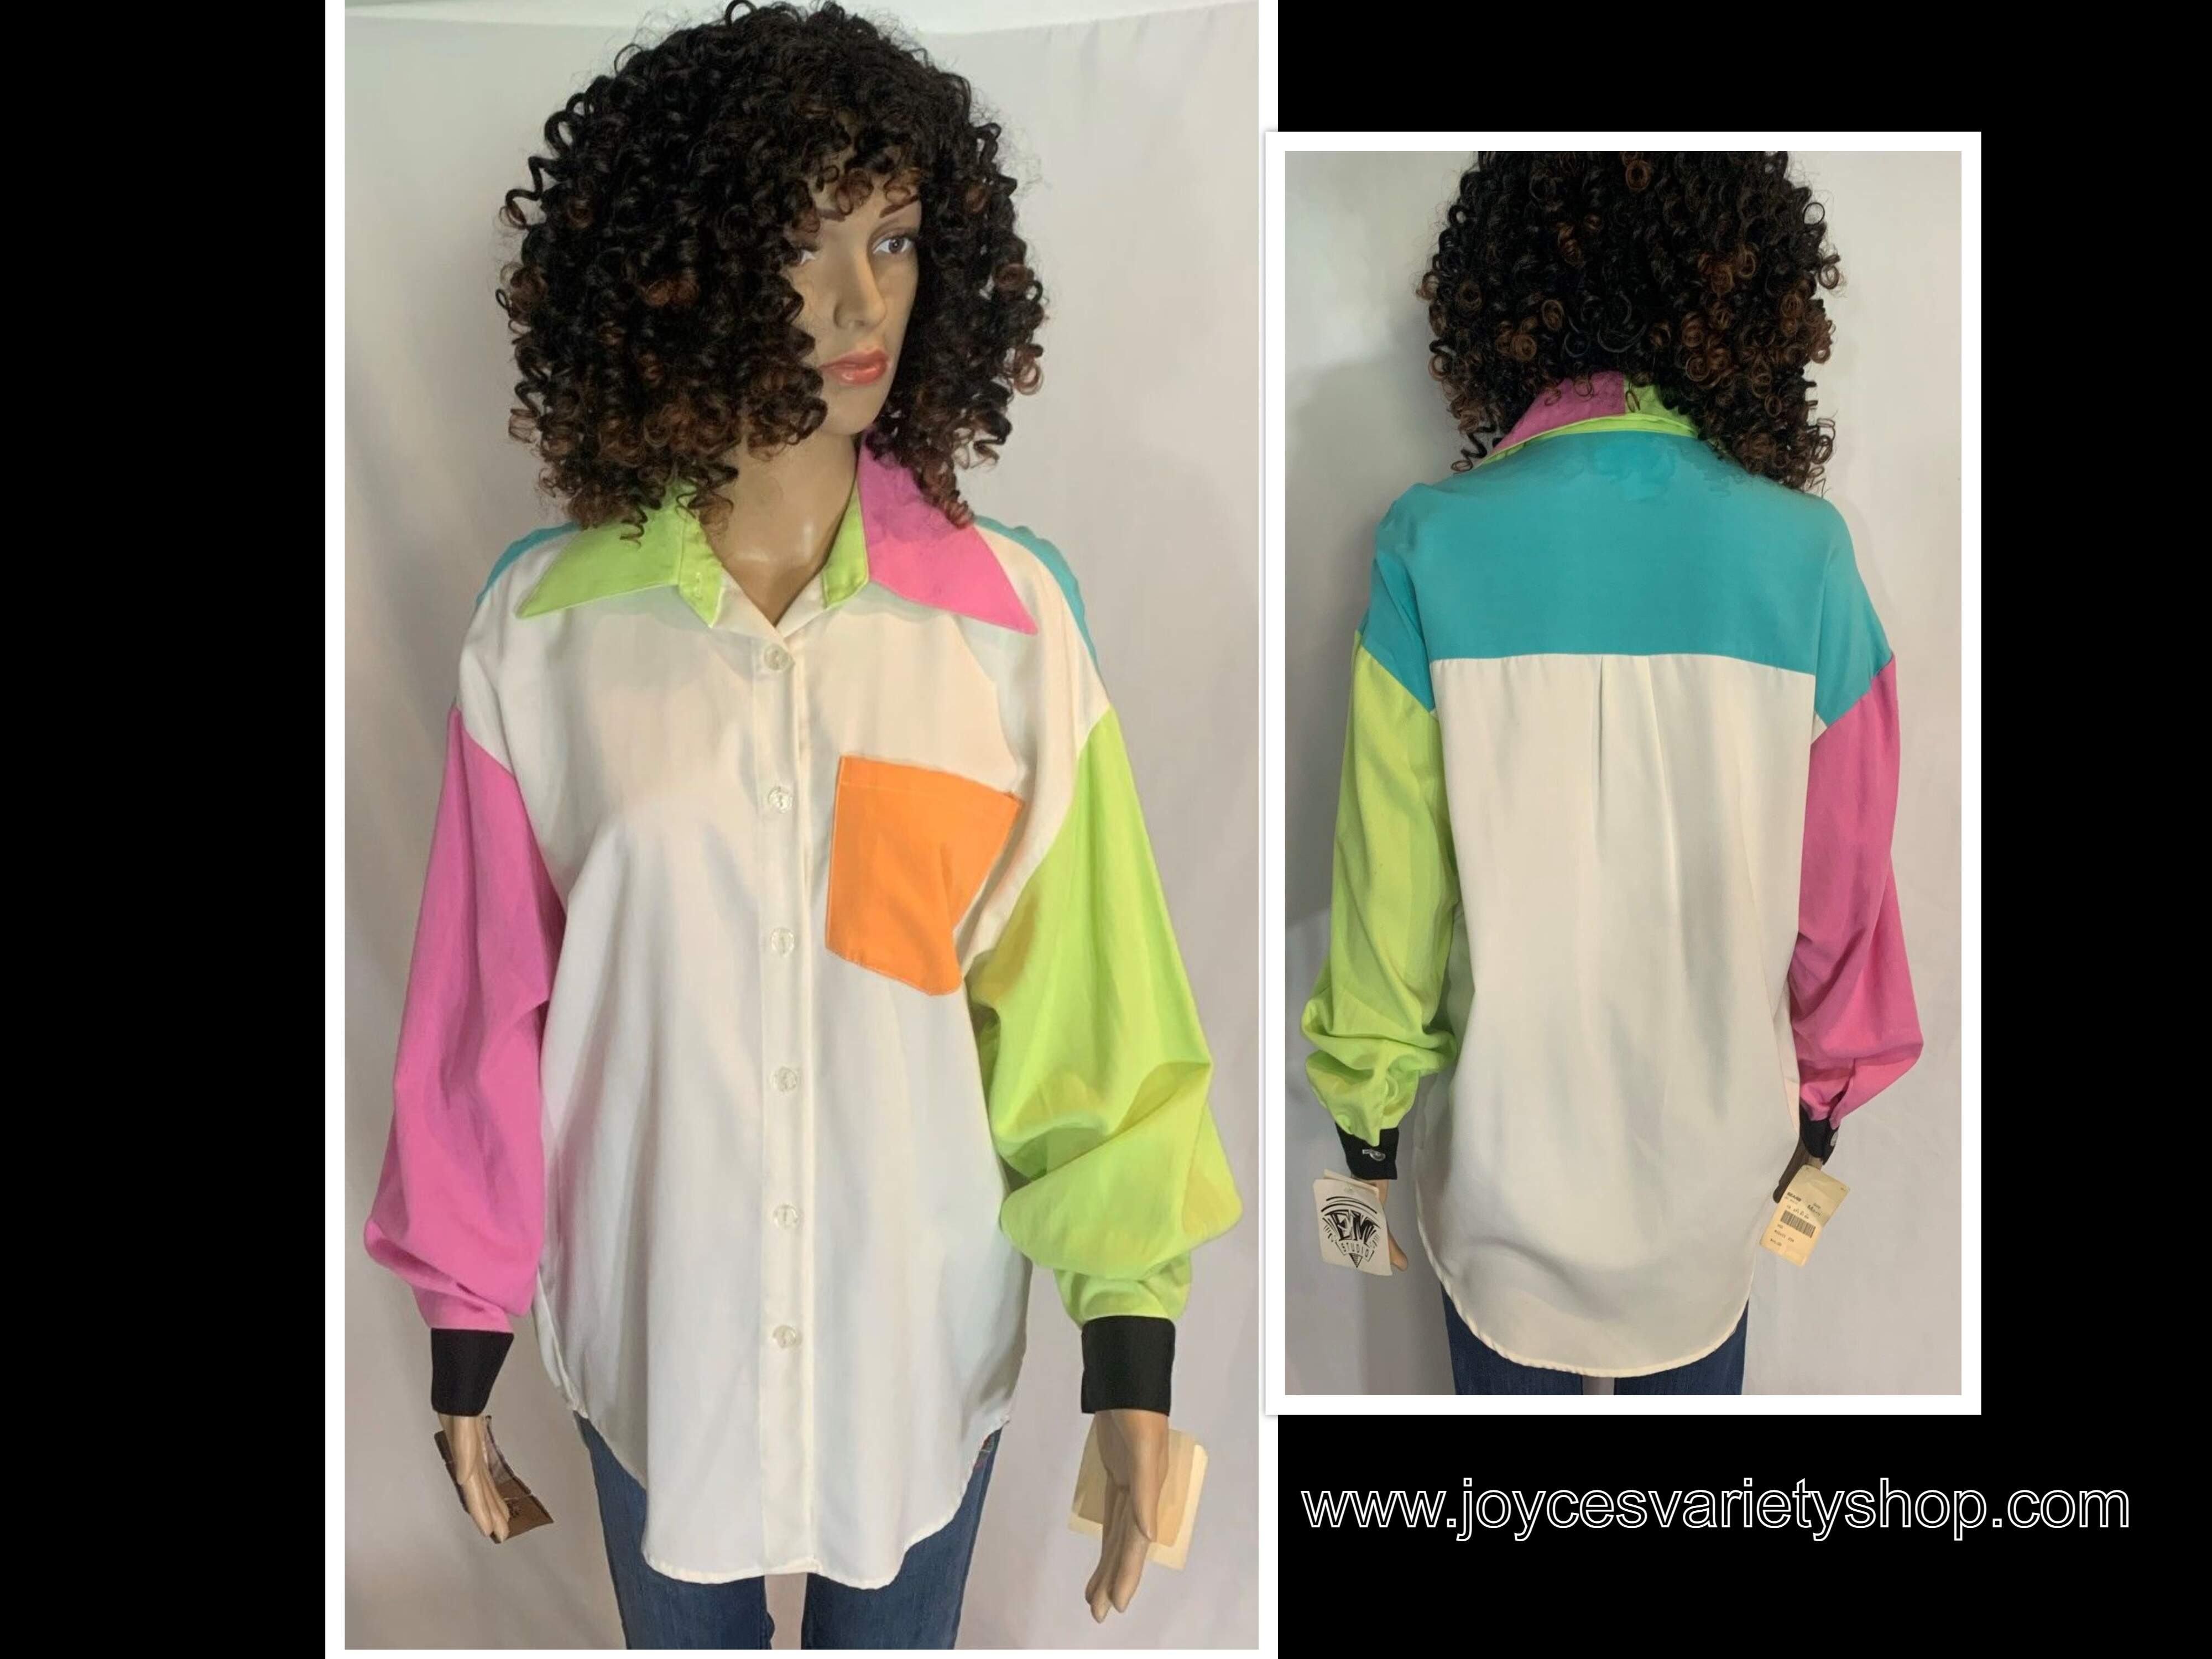 EM Studio Multi-Color Long Sleeve Blouse Top SZ M Made in USA